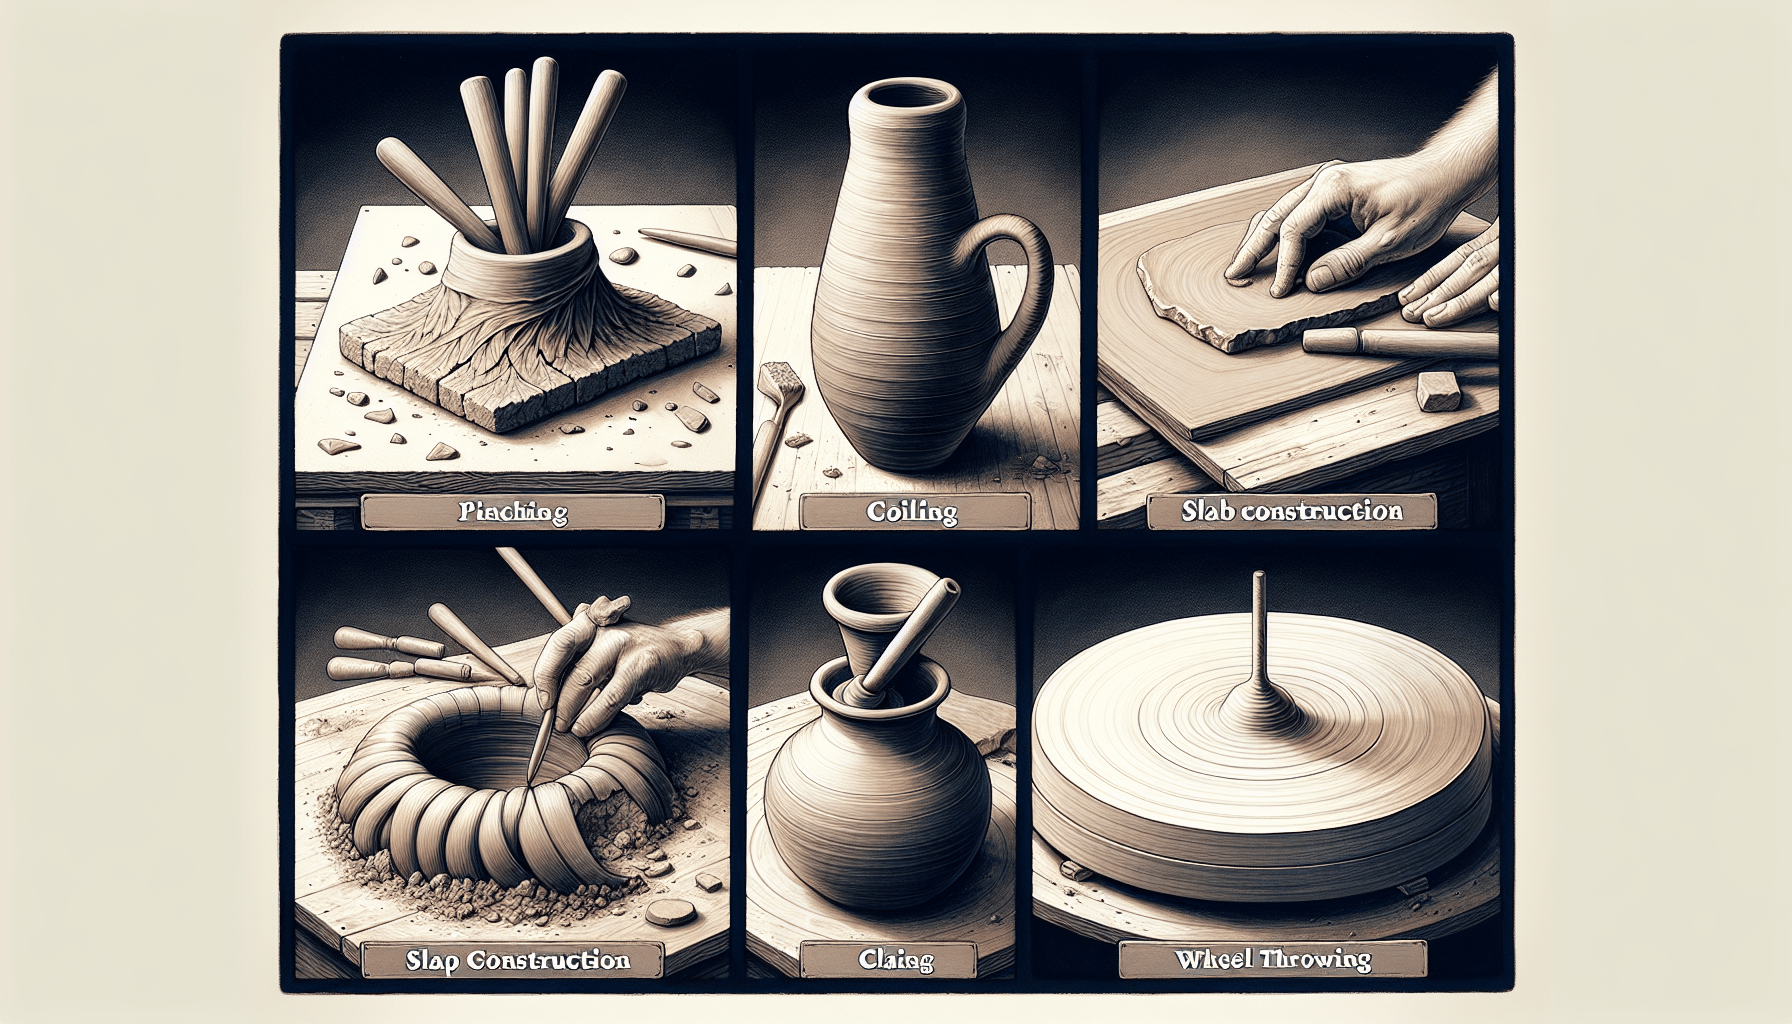 What Are The 4 Main Ways Or Techniques To Form Clay?